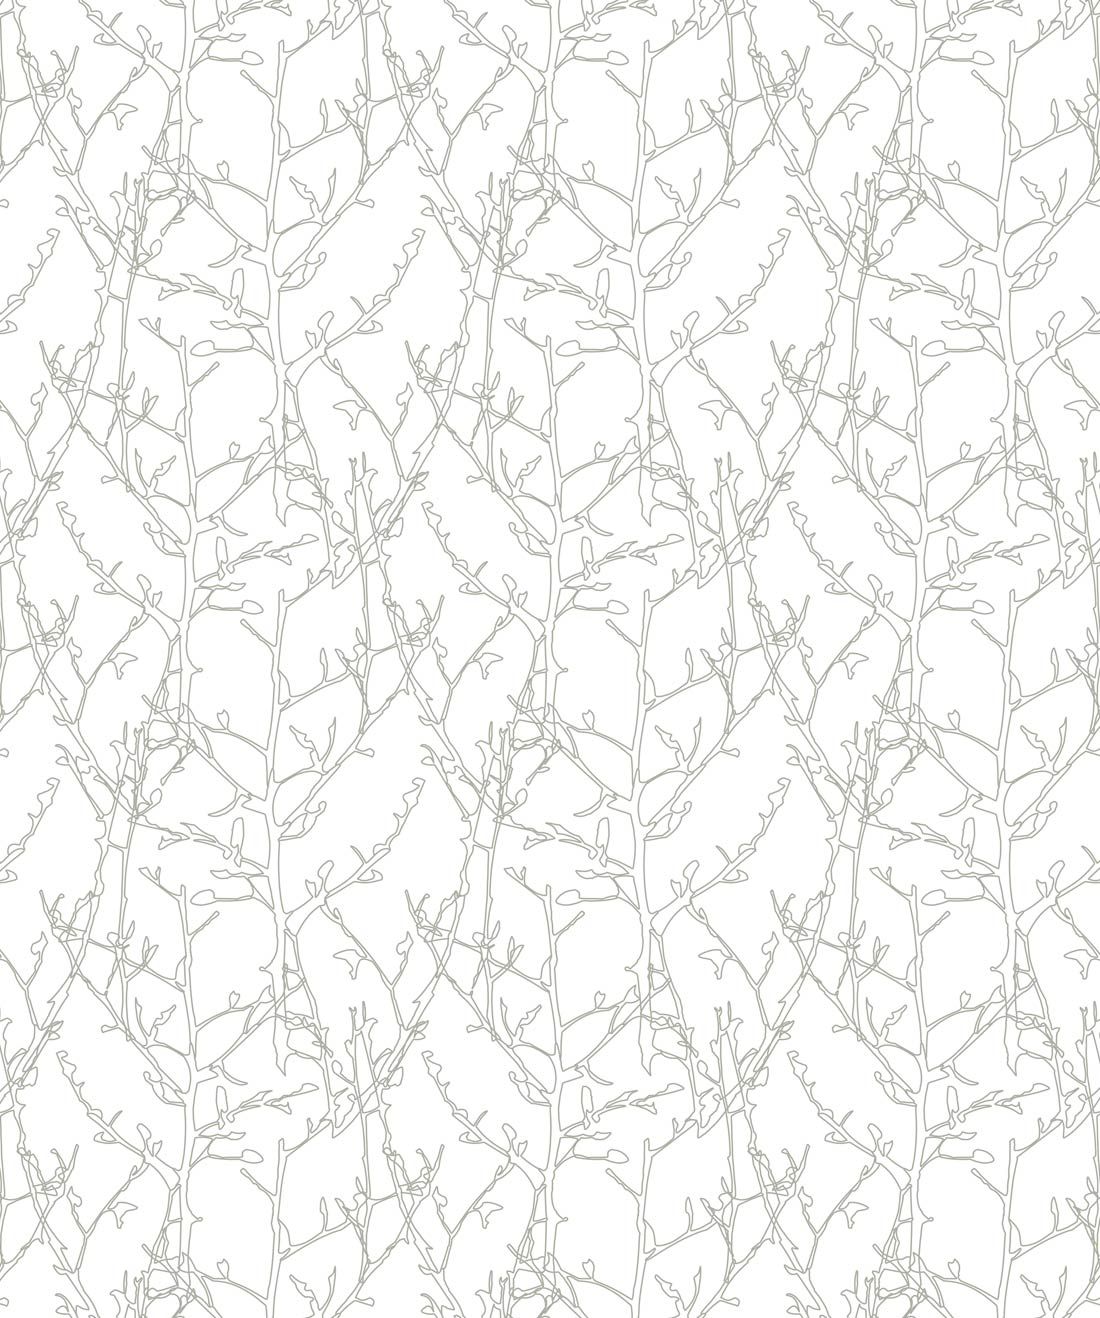 Twigs is a neutral plant Wallpaper